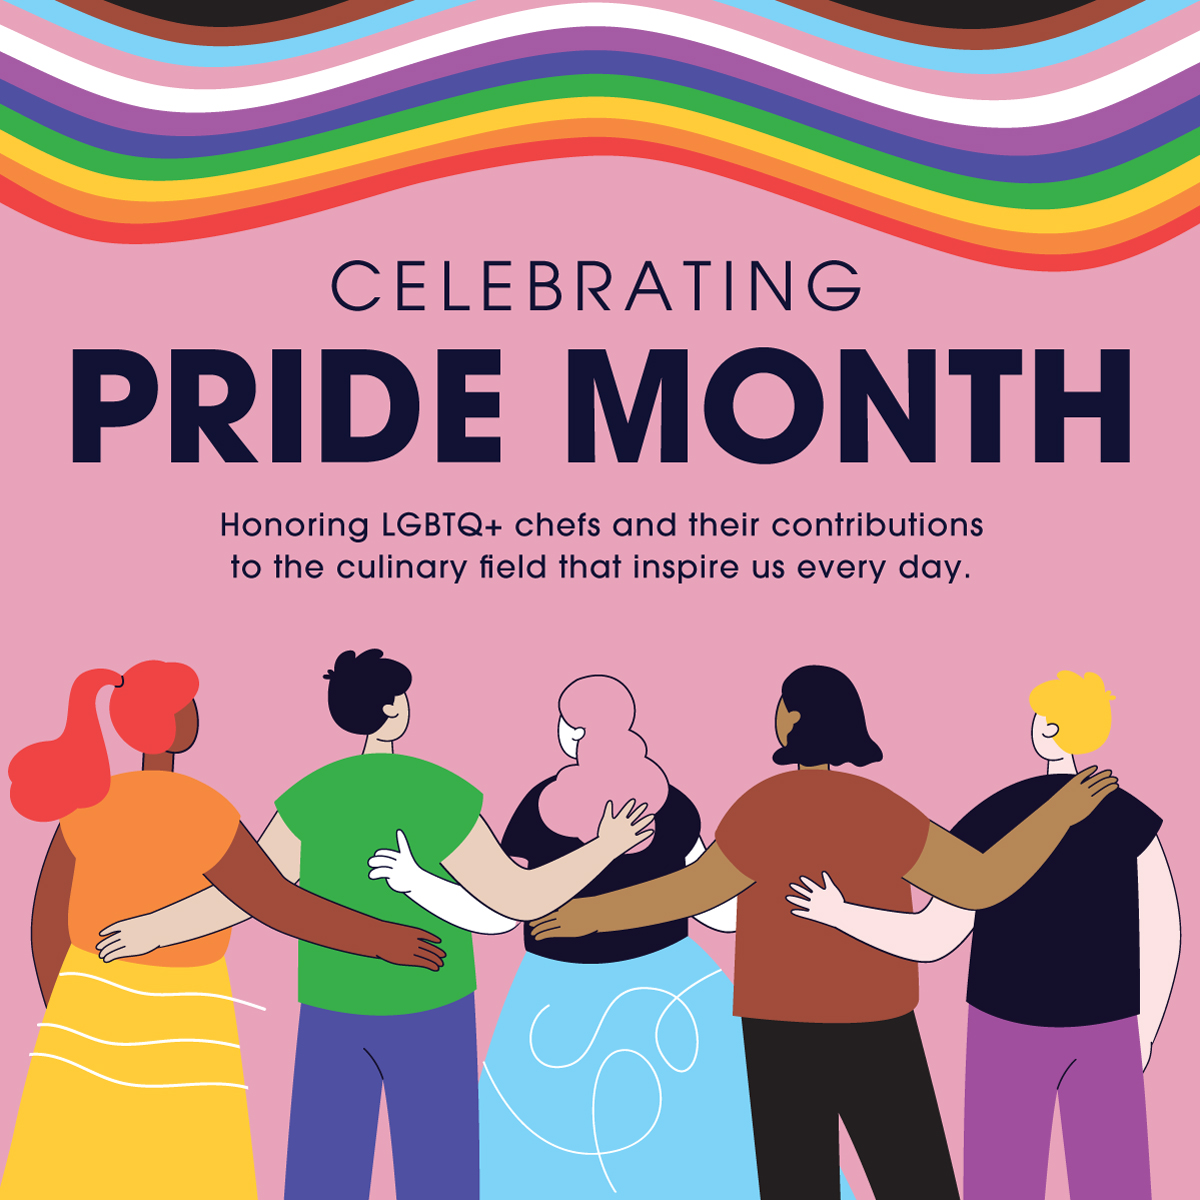 We’re celebrating #PrideMonth by recognizing LGBTQ+ chefs and allies who have had a major impact on our guests, our organization, and in their communities.  

Learn more about our Pride #ChefSpotlight participants: aramark.com/content/dam/ar… #AramarkPride